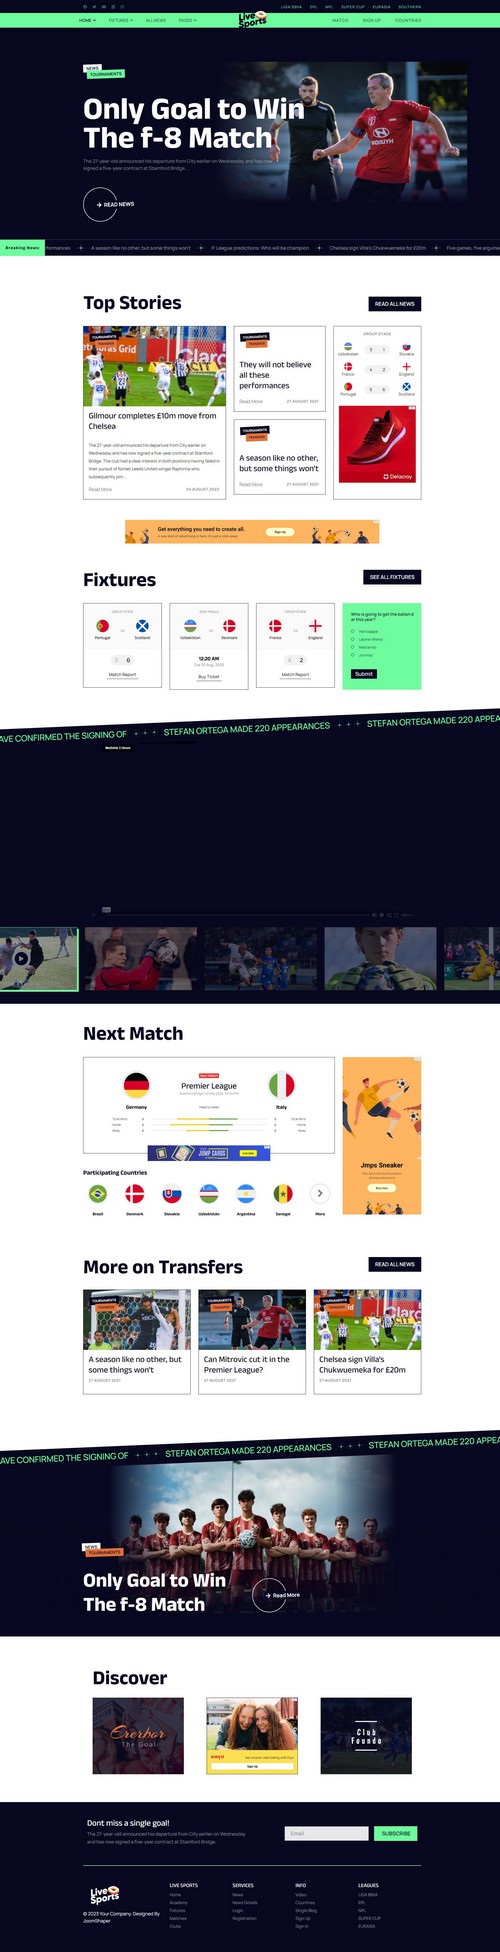 Live Sports - All - in - one Joomla 4 Template for Sports